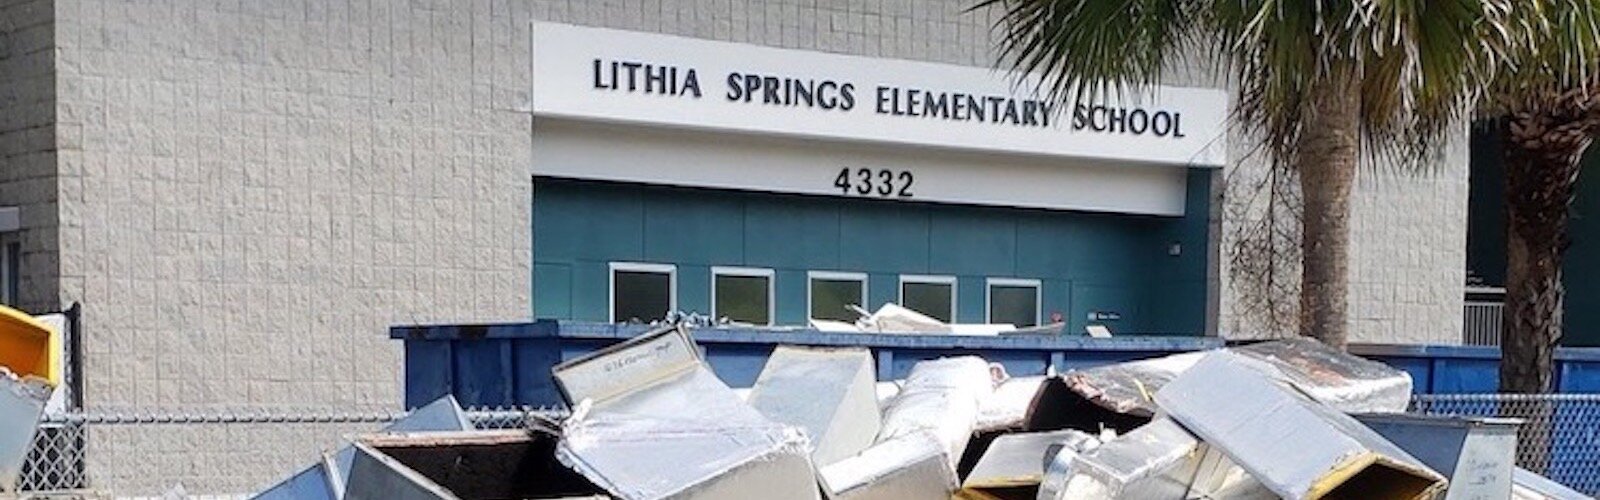 Construction debris piles up outside Lithia Springs Elementary in Valrico in East Hillsborough County.